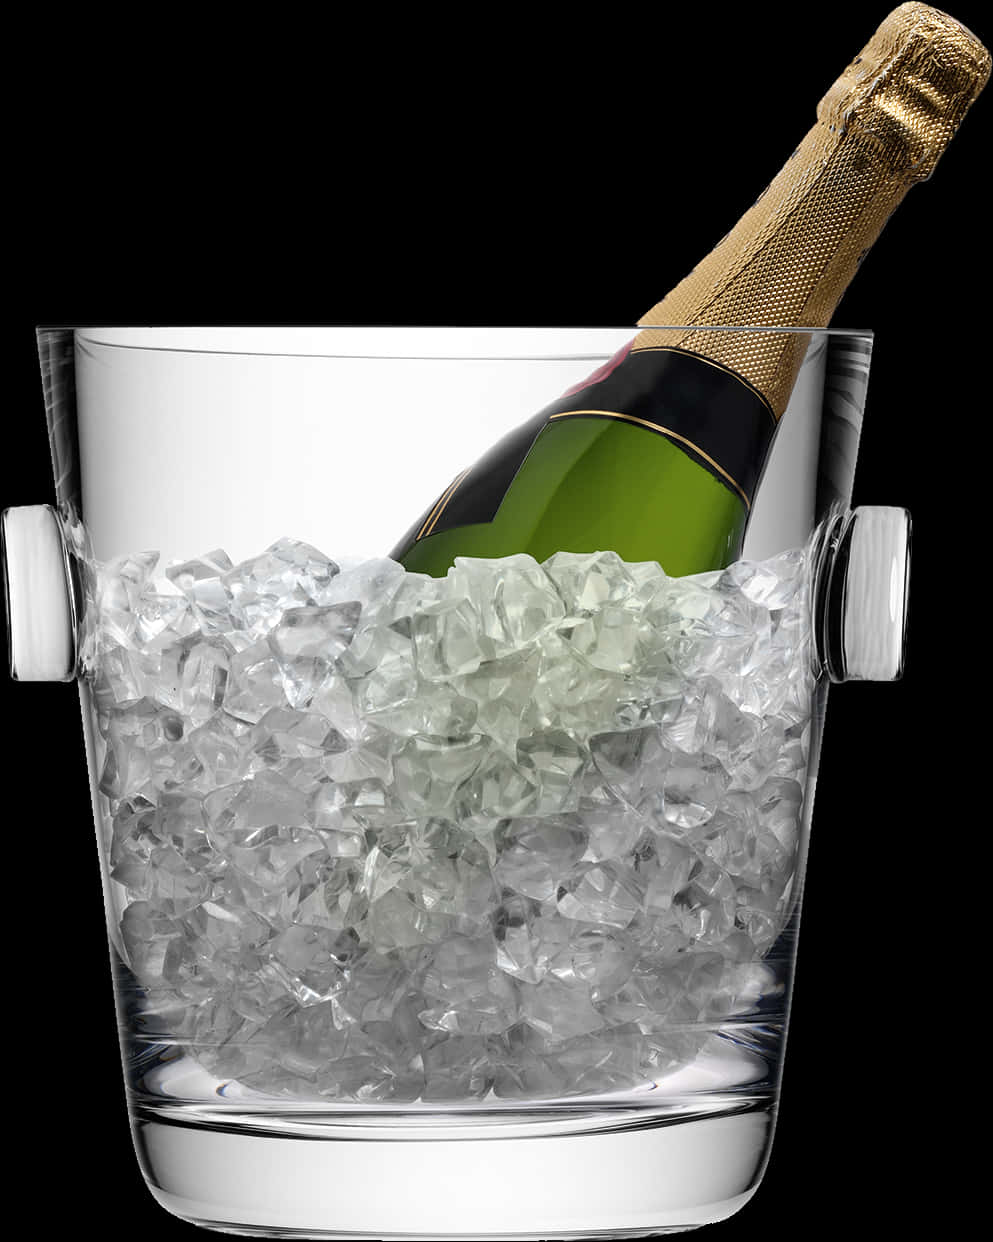 A Bottle Of Champagne In A Bucket Of Ice